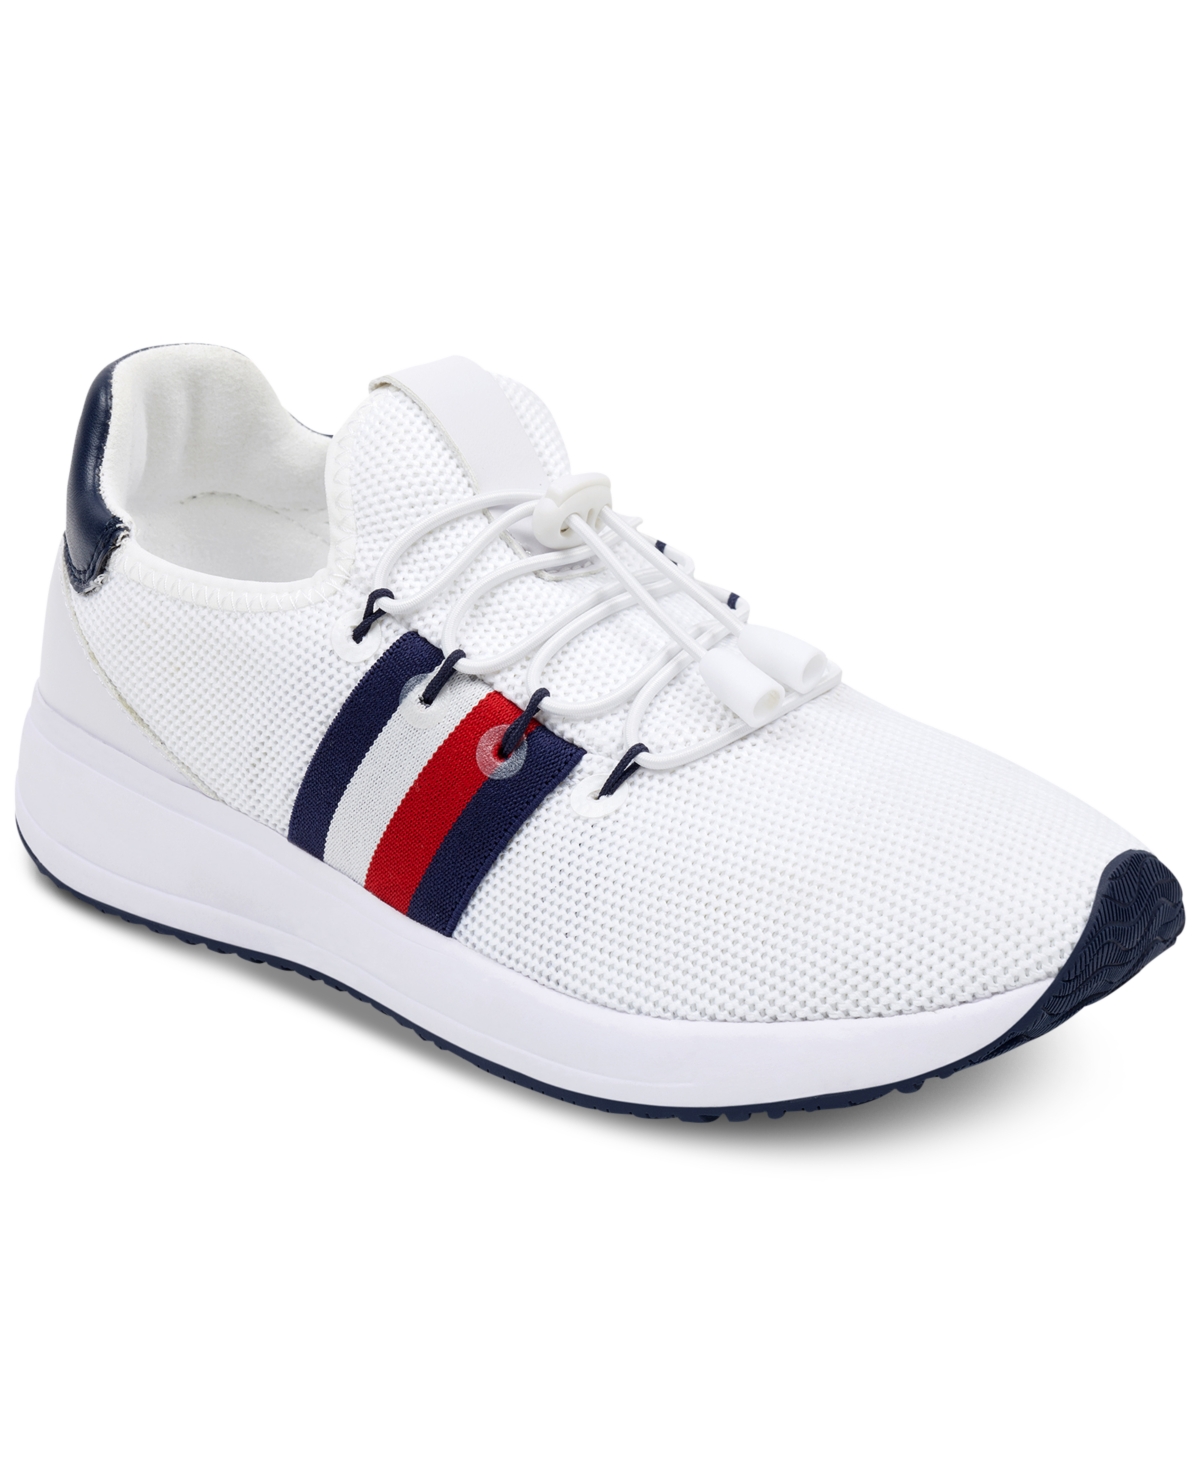 UPC 192315651319 product image for Tommy Hilfiger Rhena Sneakers Women's Shoes | upcitemdb.com